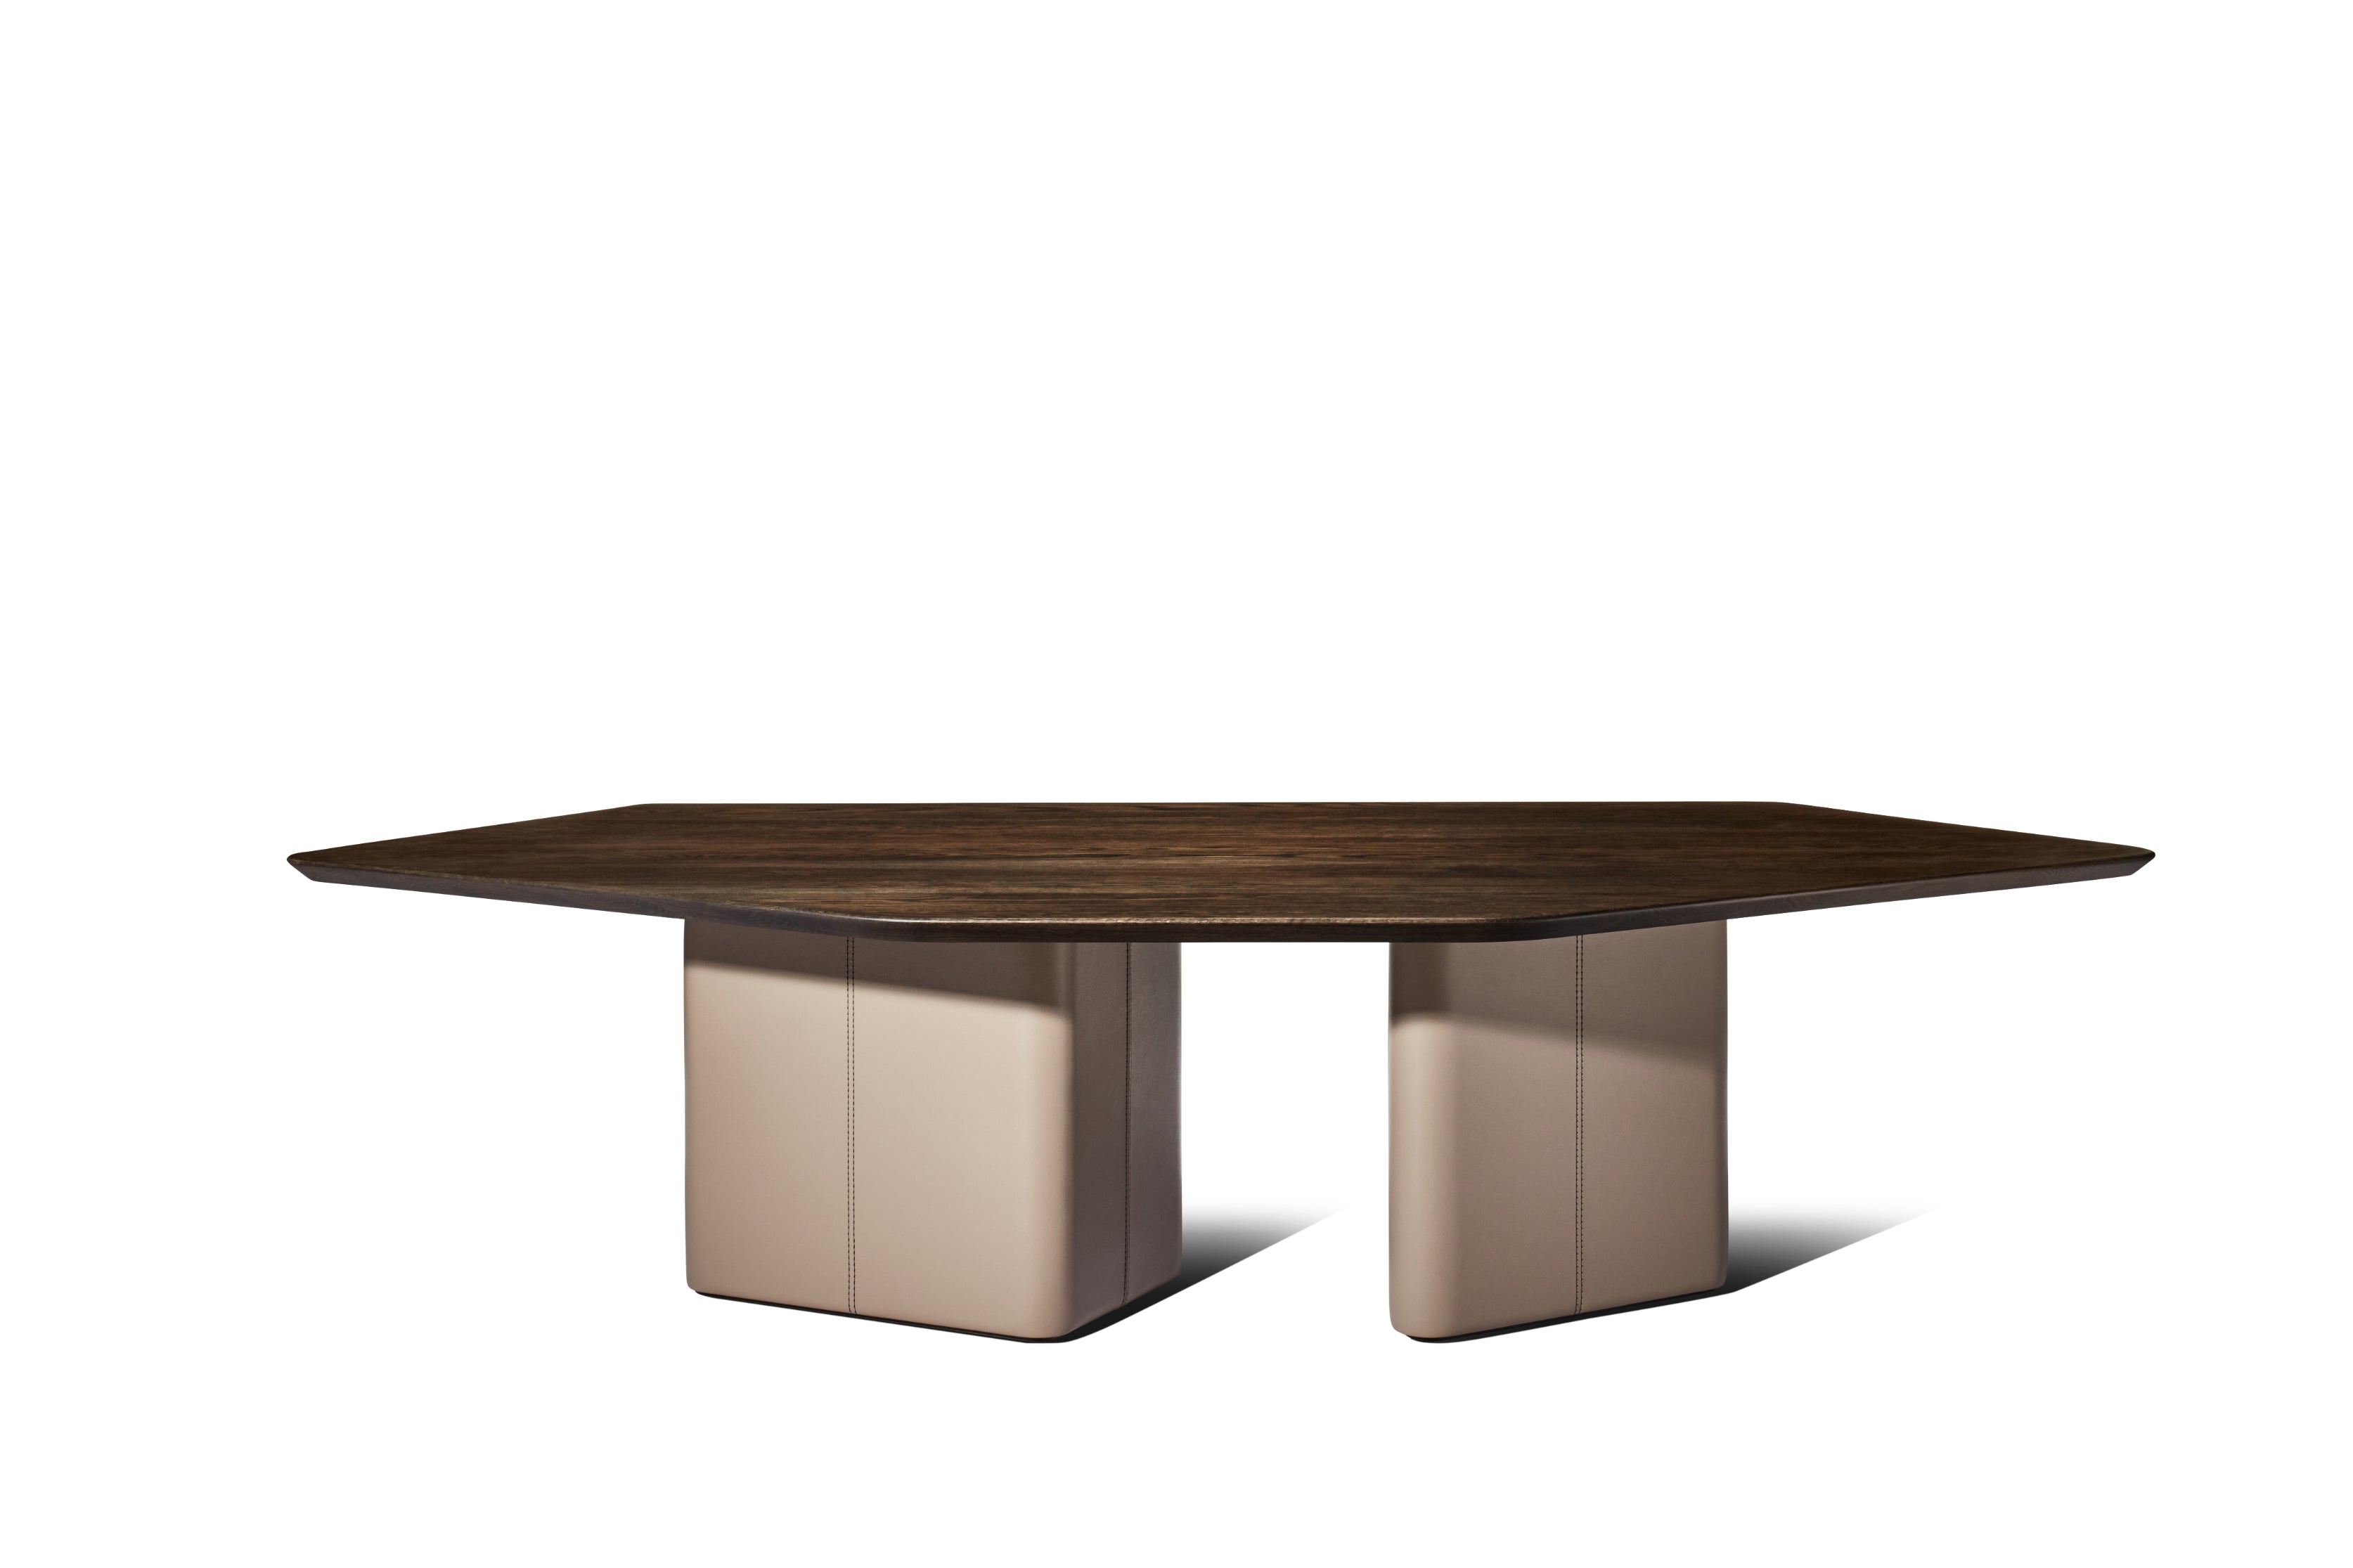 Artisan Dining Table - Coal & Almond Faux Leather - Zuster Furniture